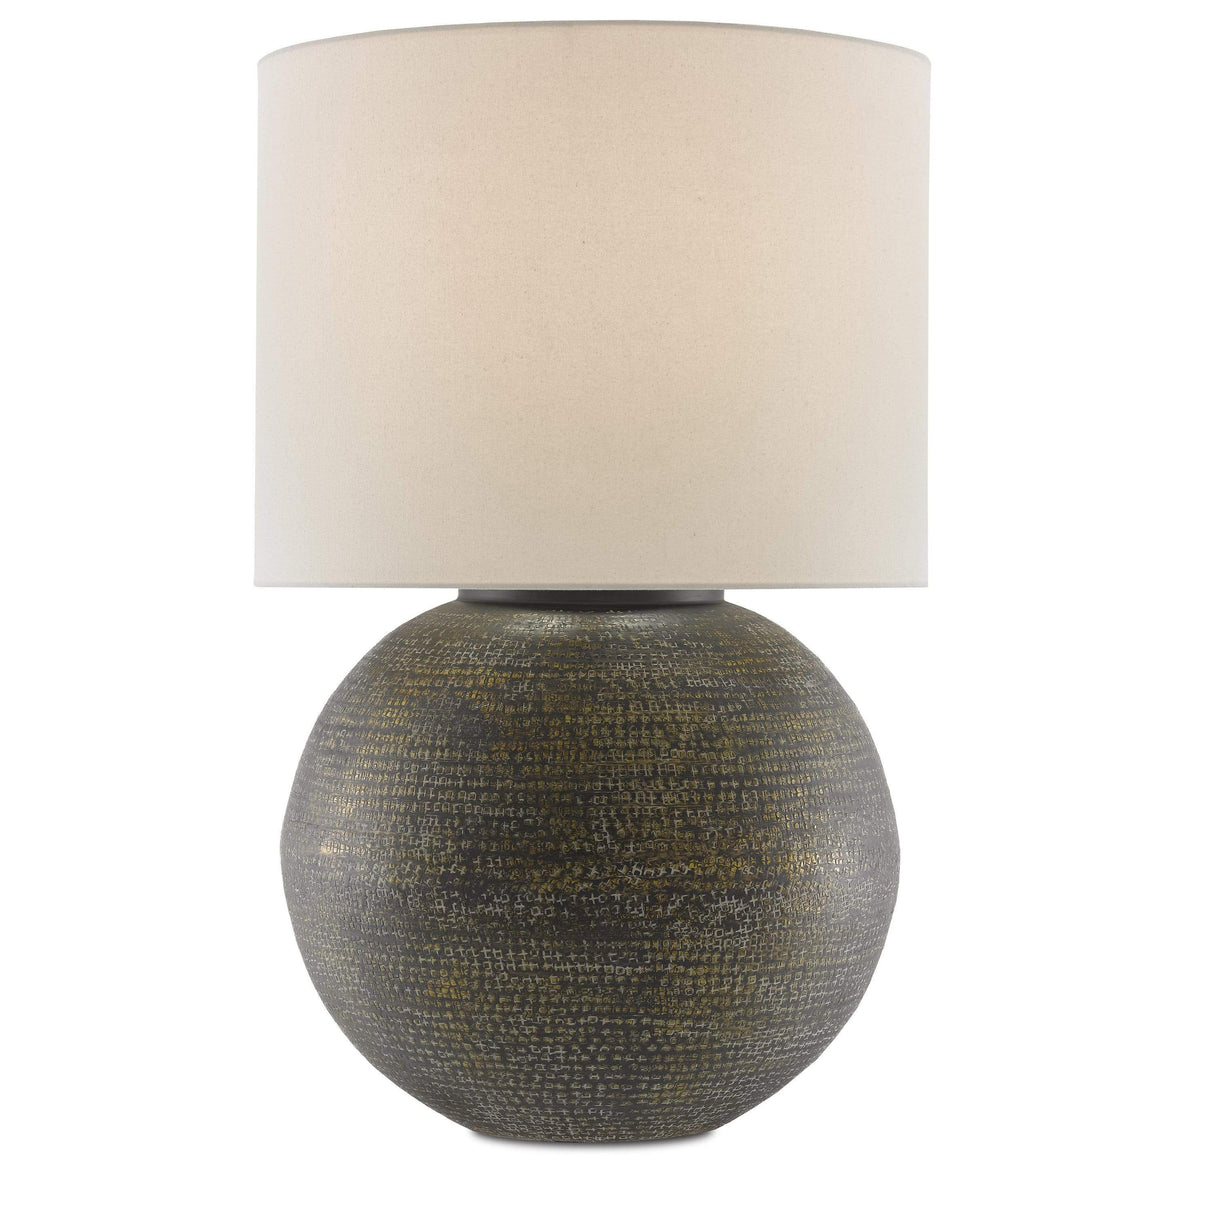 Currey & Company Brigands Table Lamp Lighting currey-co-6000-0633